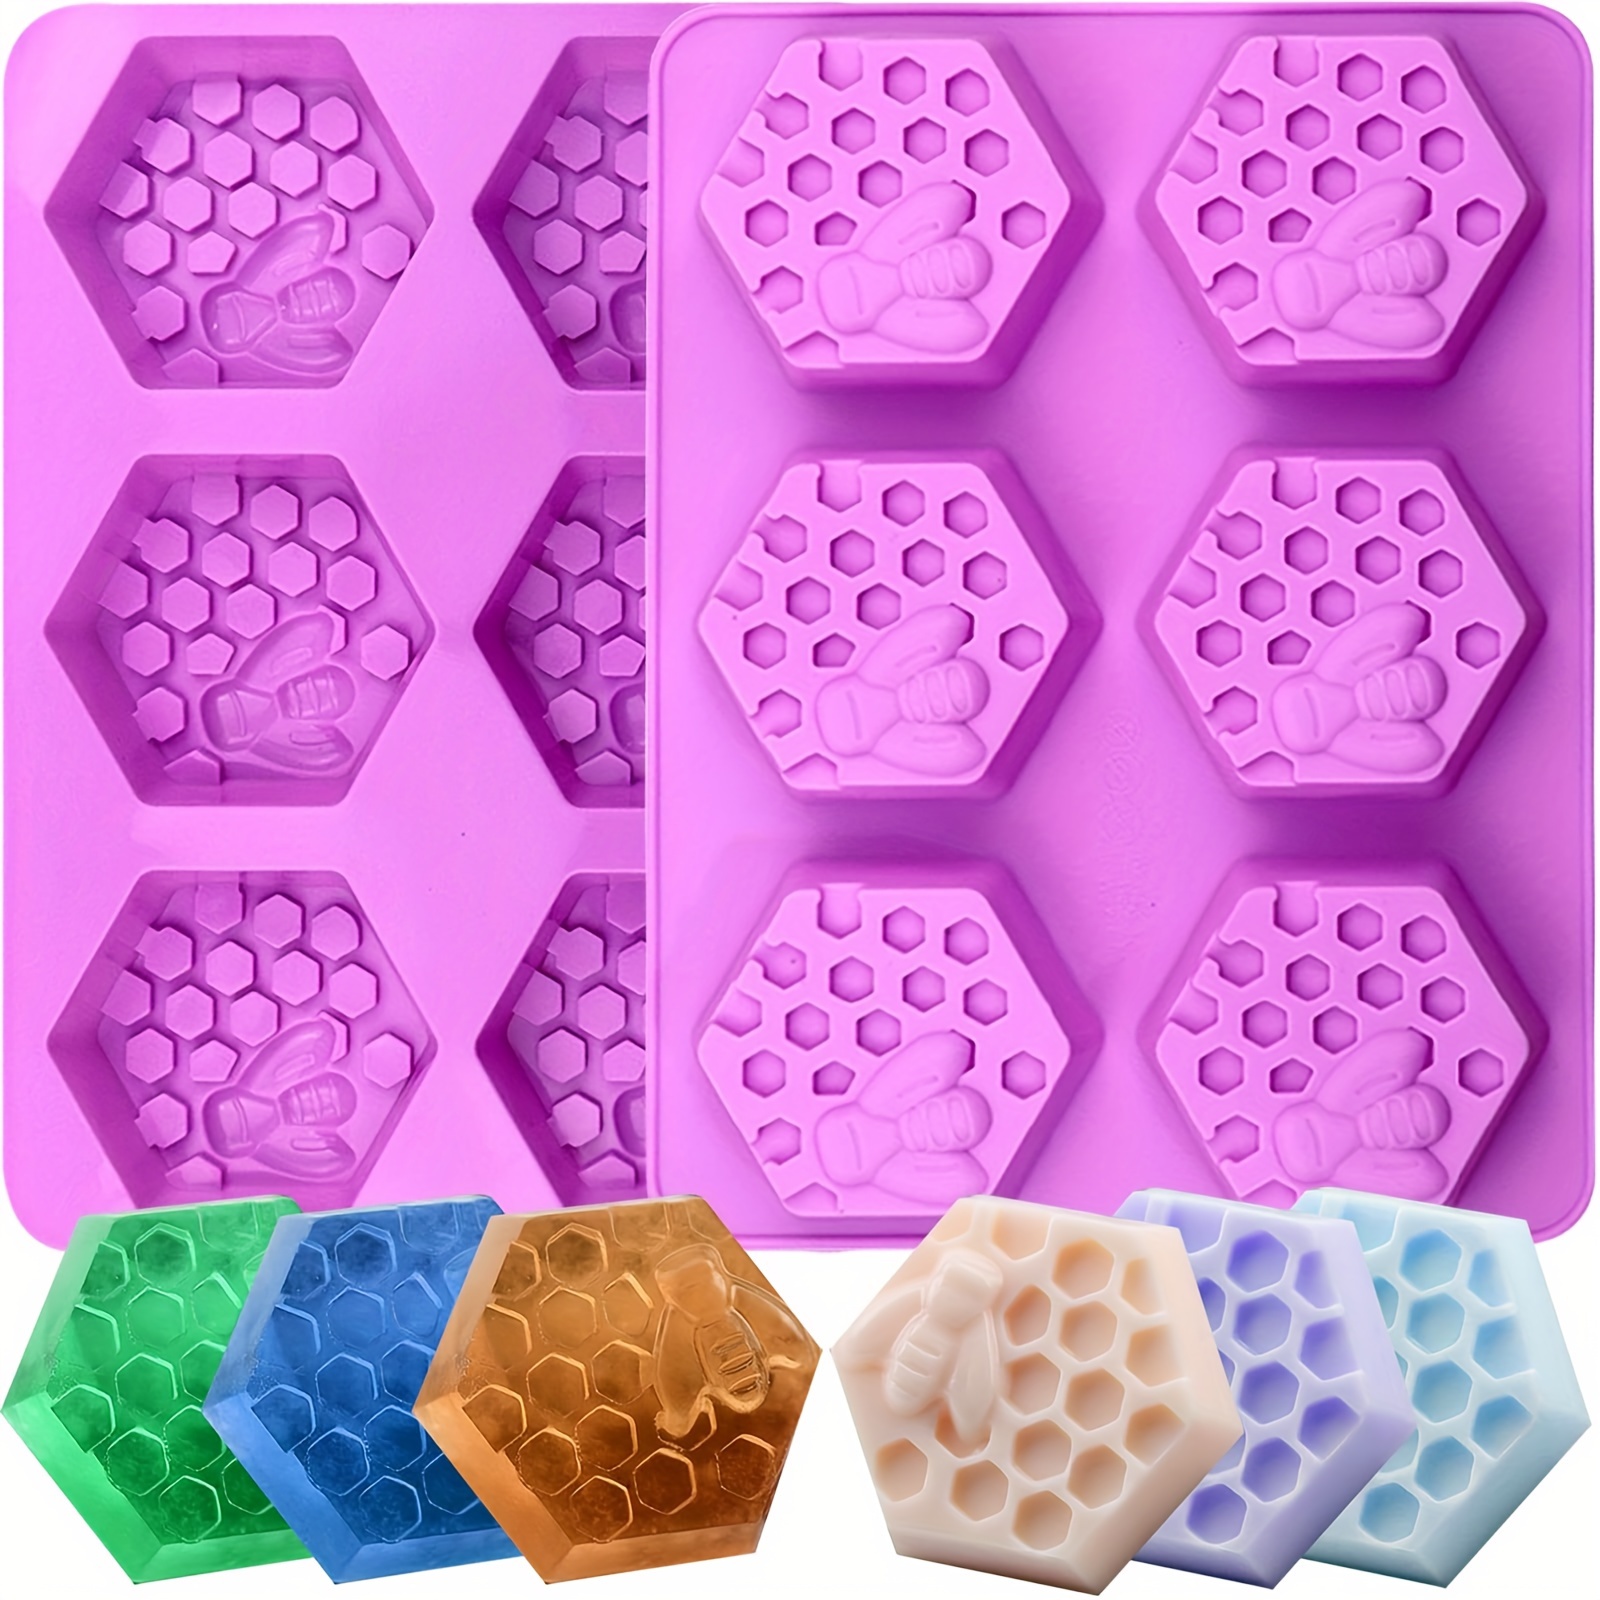 3D Cylinder Bee Honeycomb Mold Beeswax Candles Soaps Lotion Bars Chocolate  Beehive Silicone Mould 